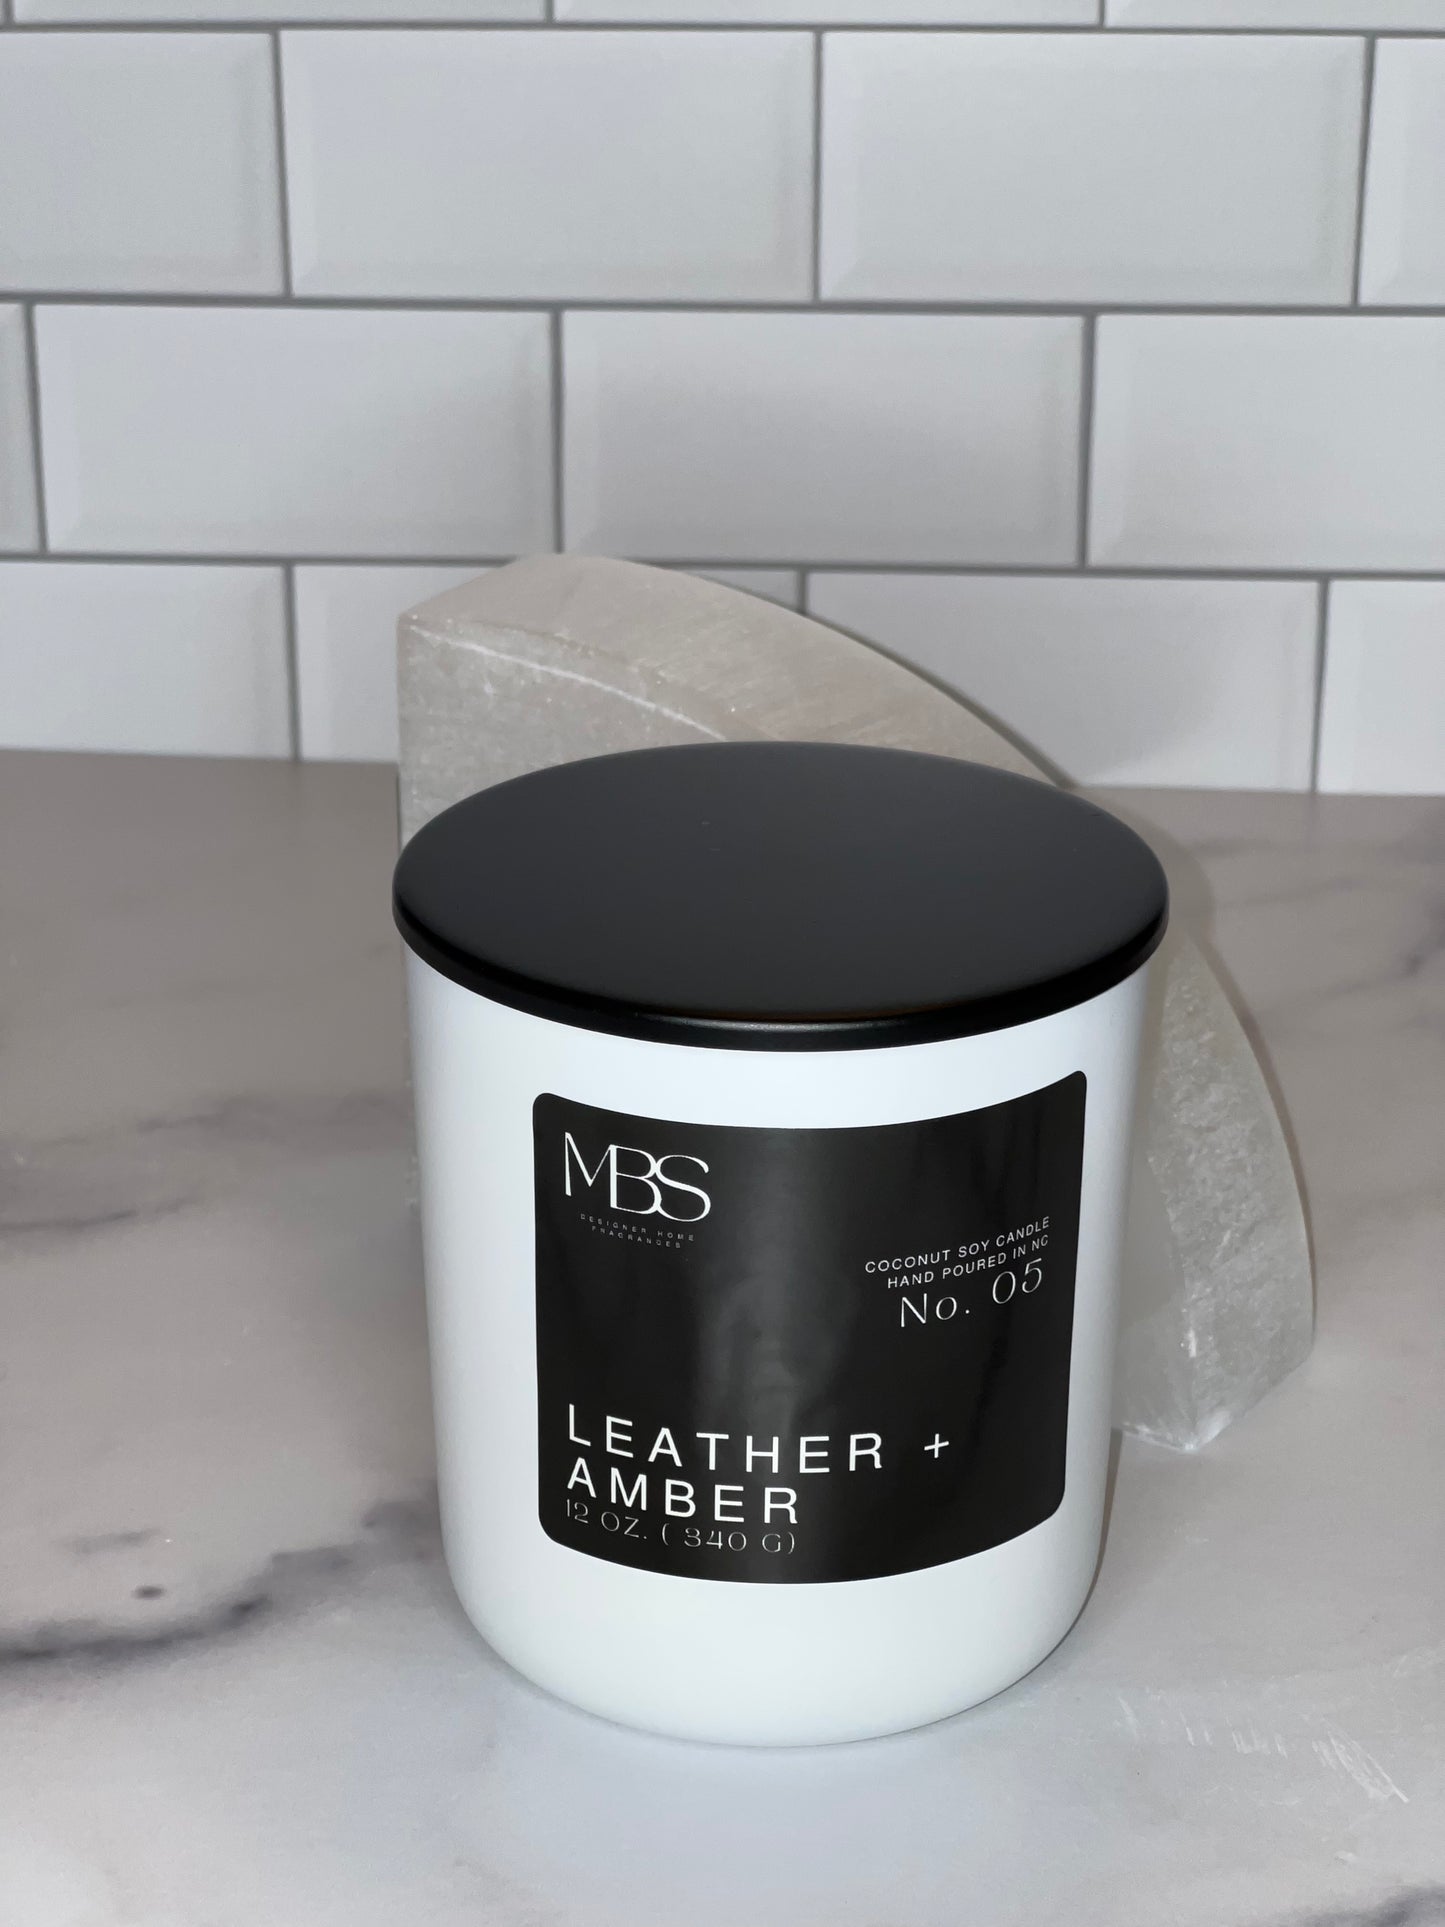 Leather + Amber | No. 05 Candle - Mind Body & Scents, LLC